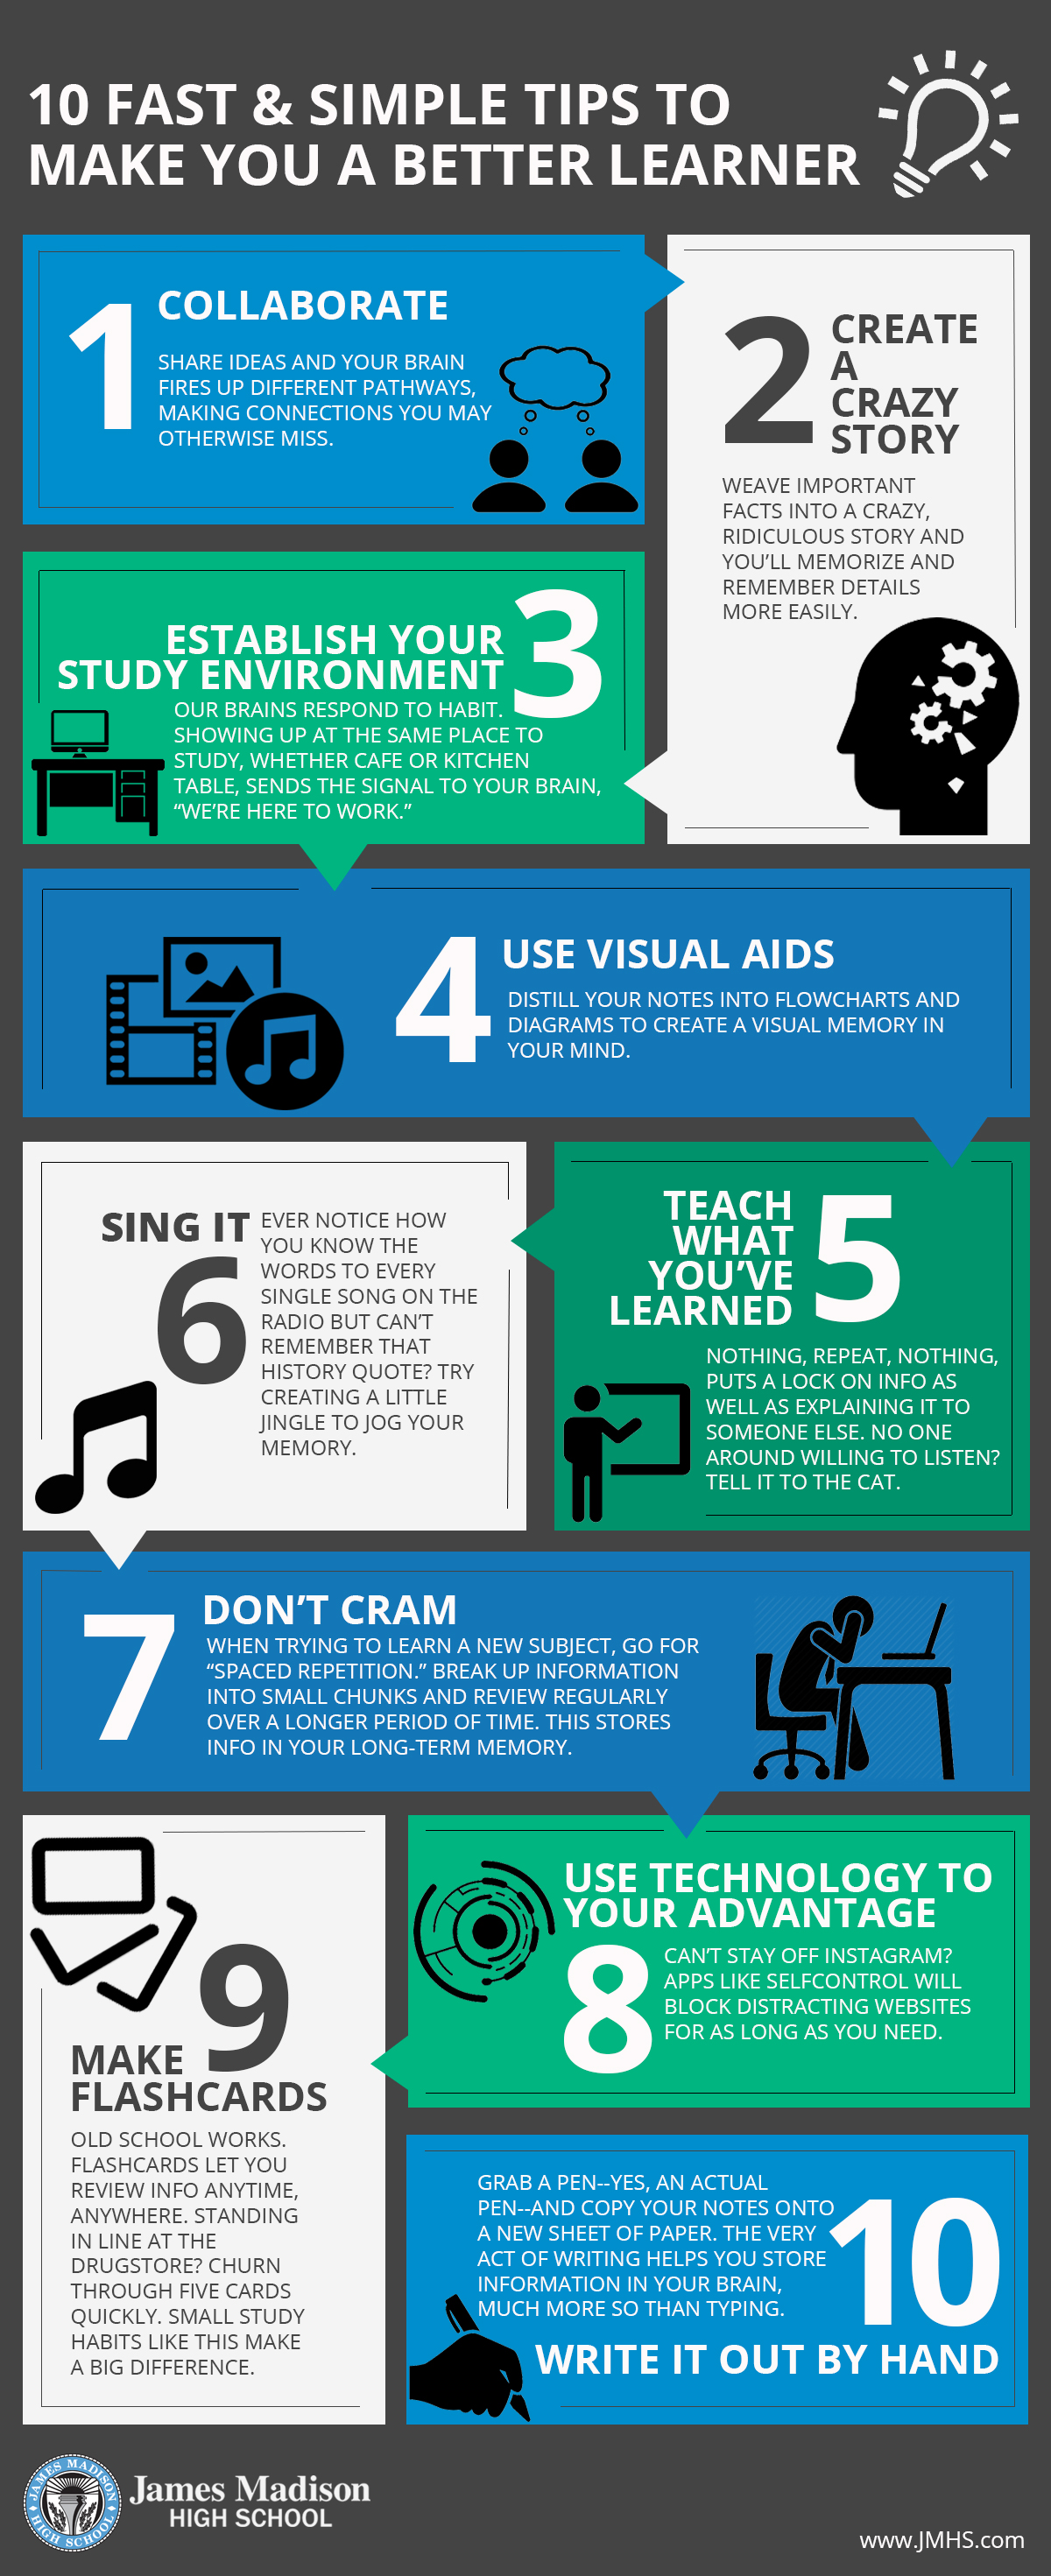 10 Fast & Simple Tips for Better Learning - An Infographic